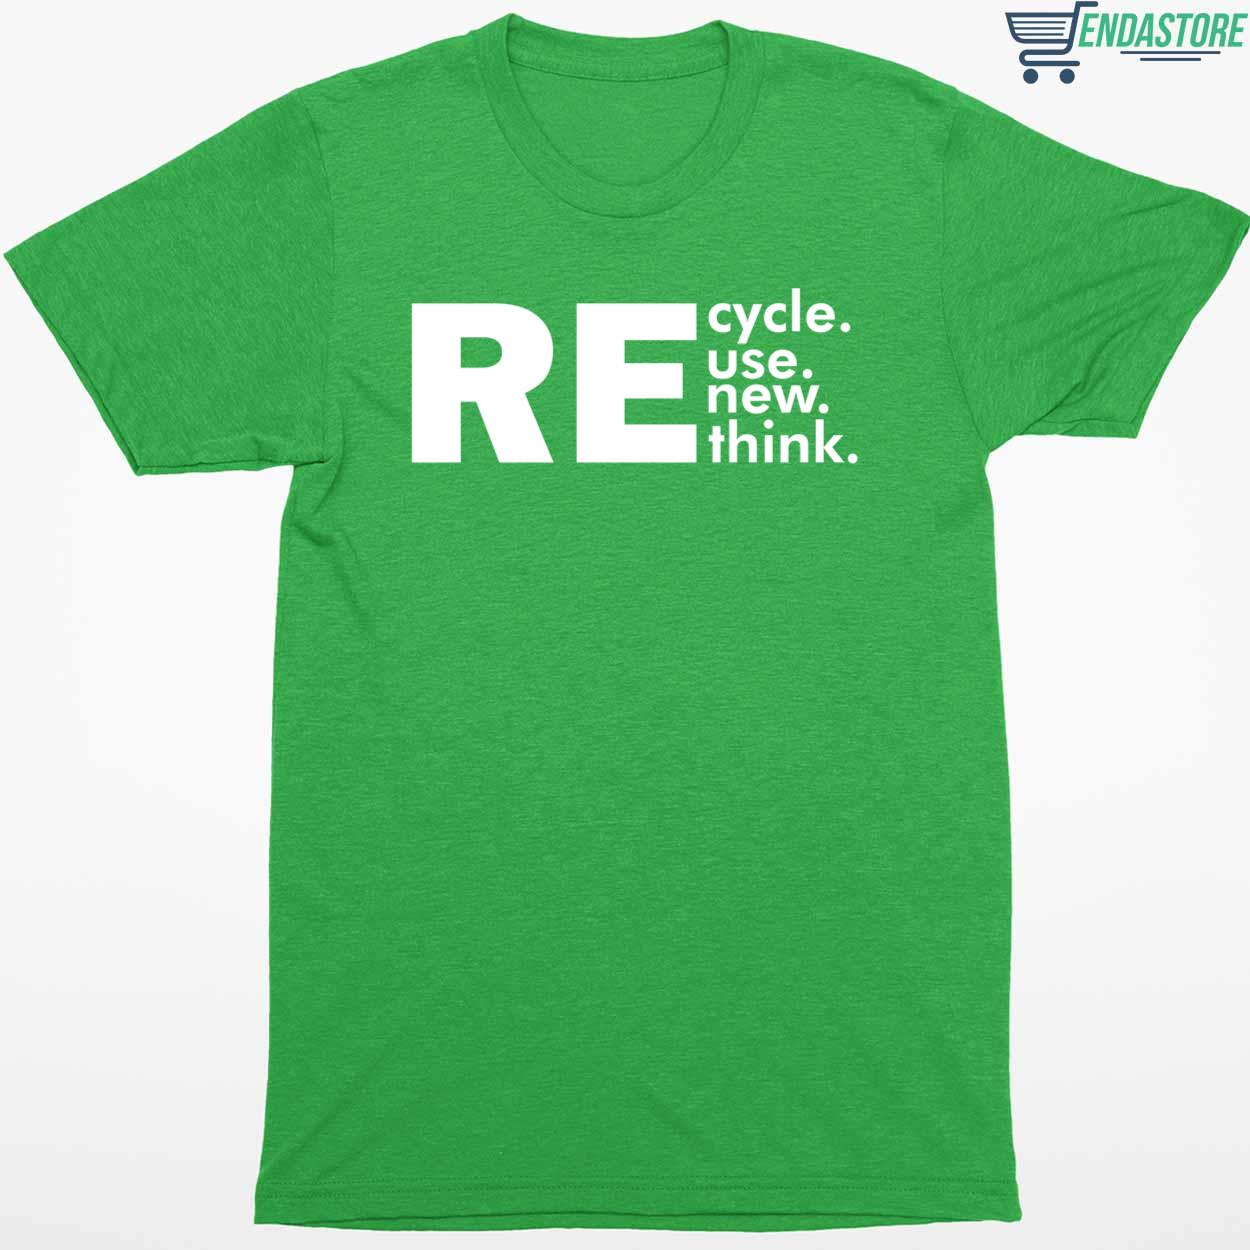 Walmart Removes Offensive, Recycle Reuse Renew Rethink Shirt